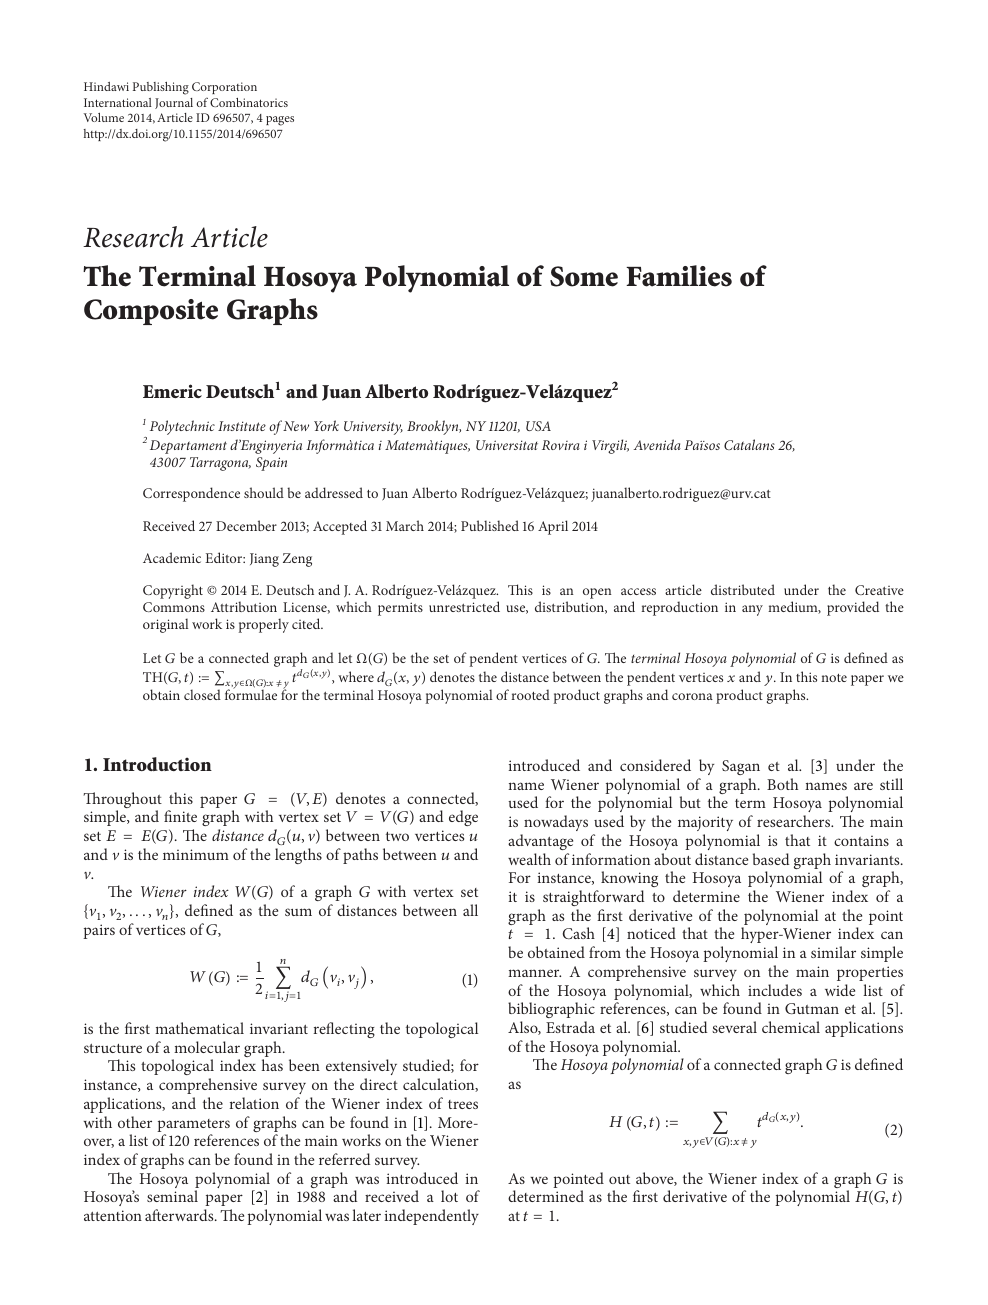 The Terminal Hosoya Polynomial Of Some Families Of Composite Graphs Topic Of Research Paper In Mathematics Download Scholarly Article Pdf And Read For Free On Cyberleninka Open Science Hub